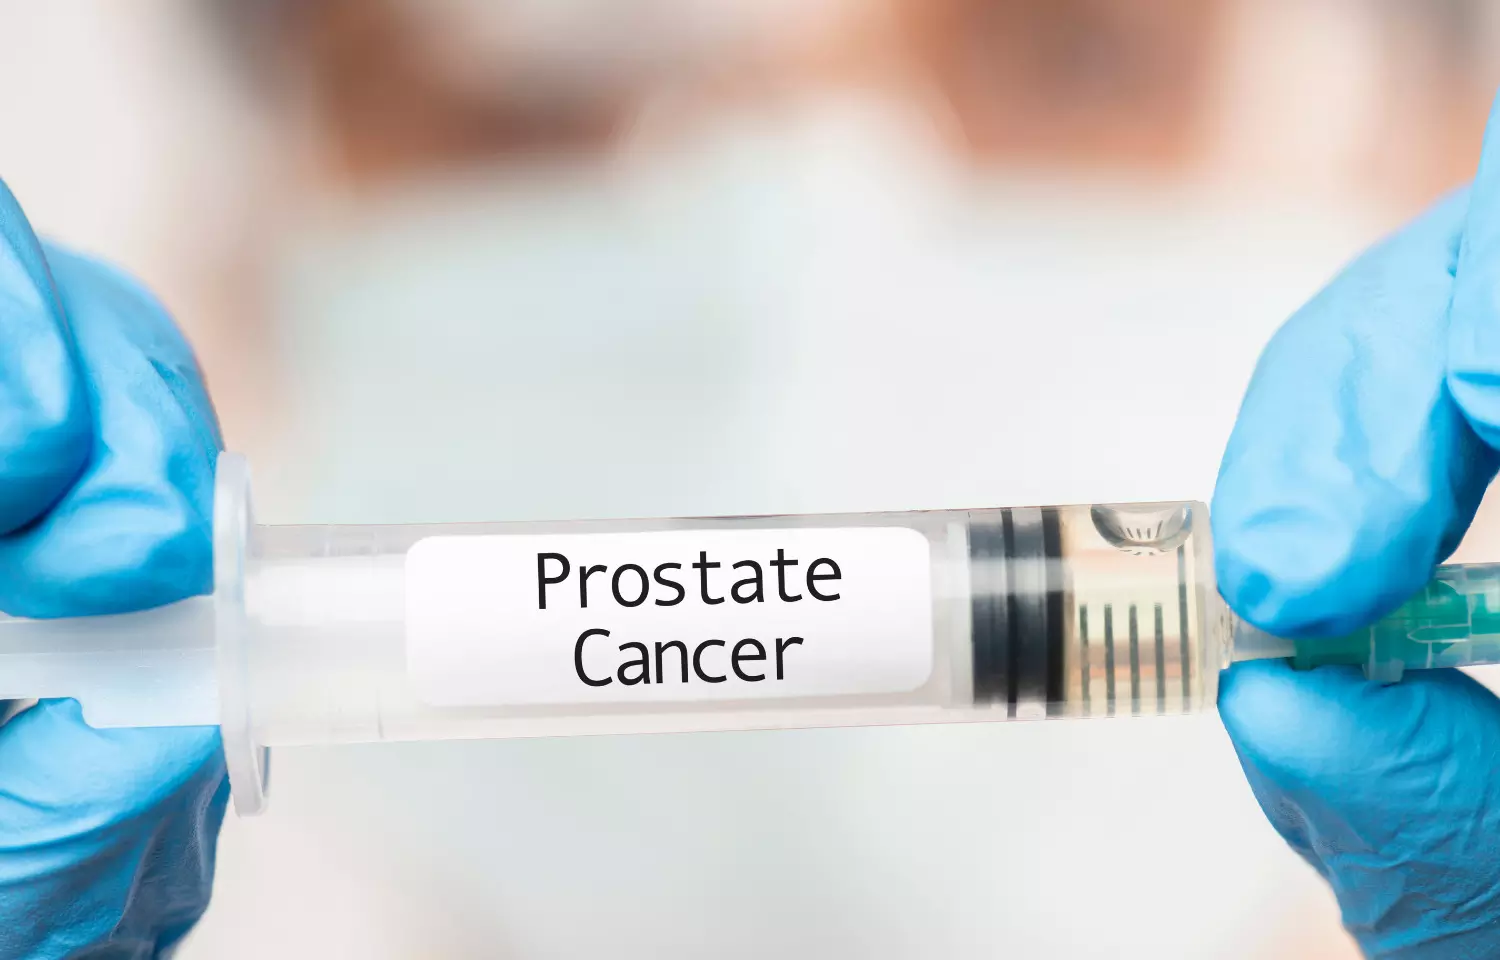 New combined therapy helps extend lives of men with prostate cancer